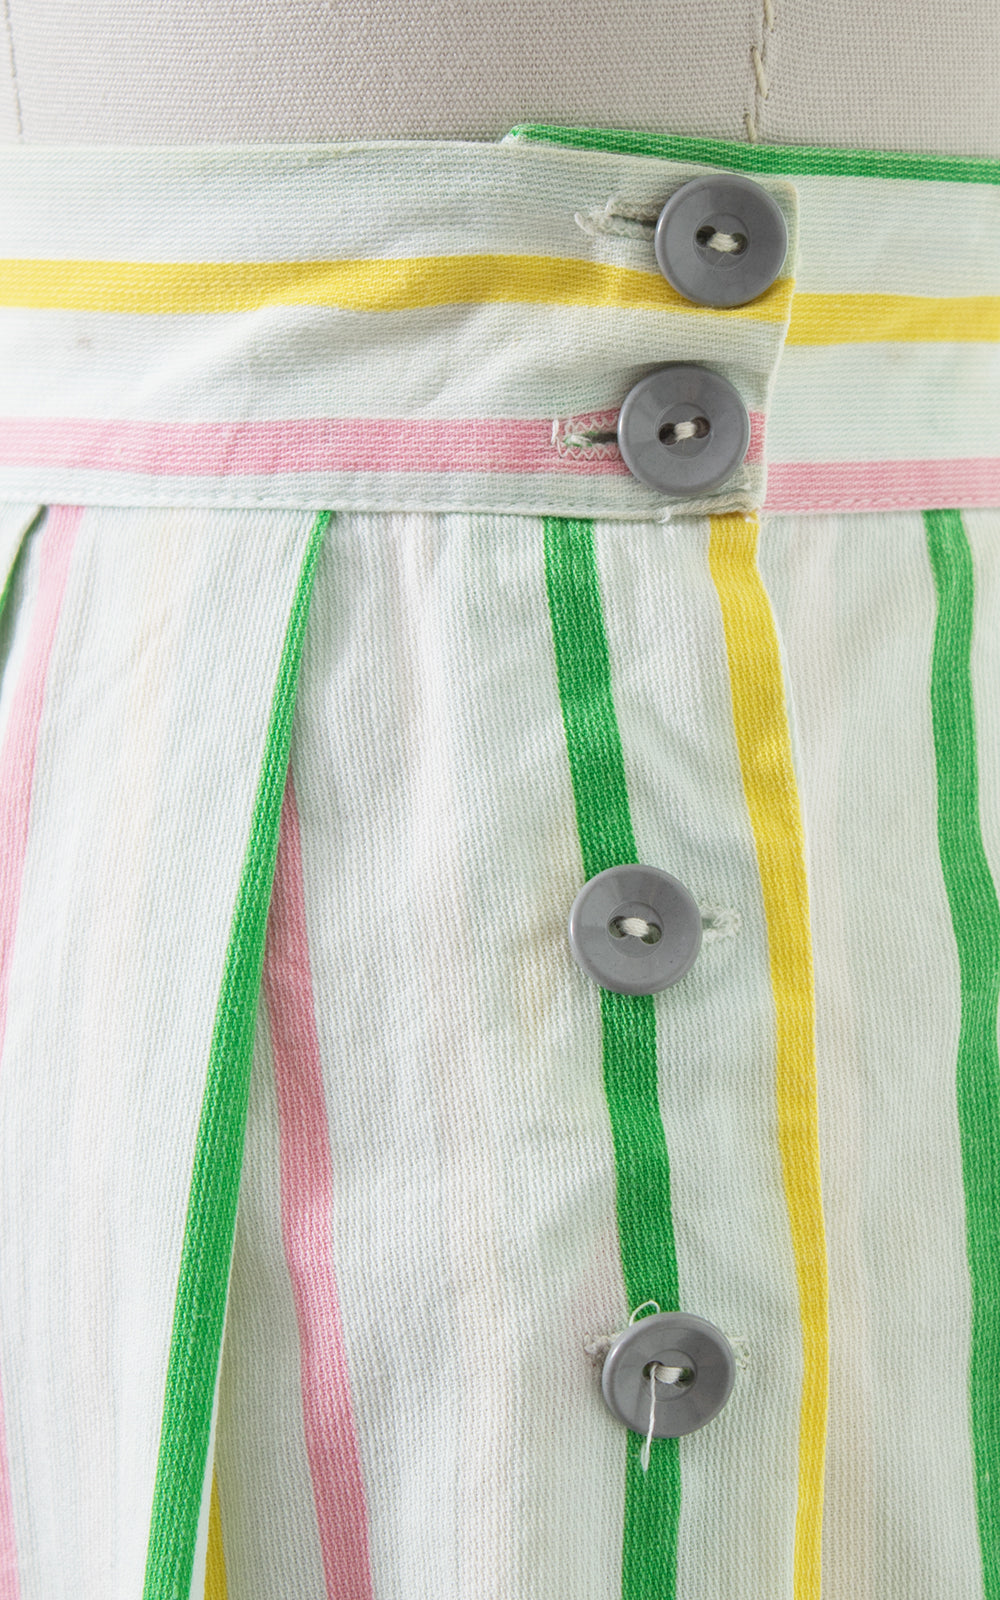 1940s Striped Cotton Pleated Shorts